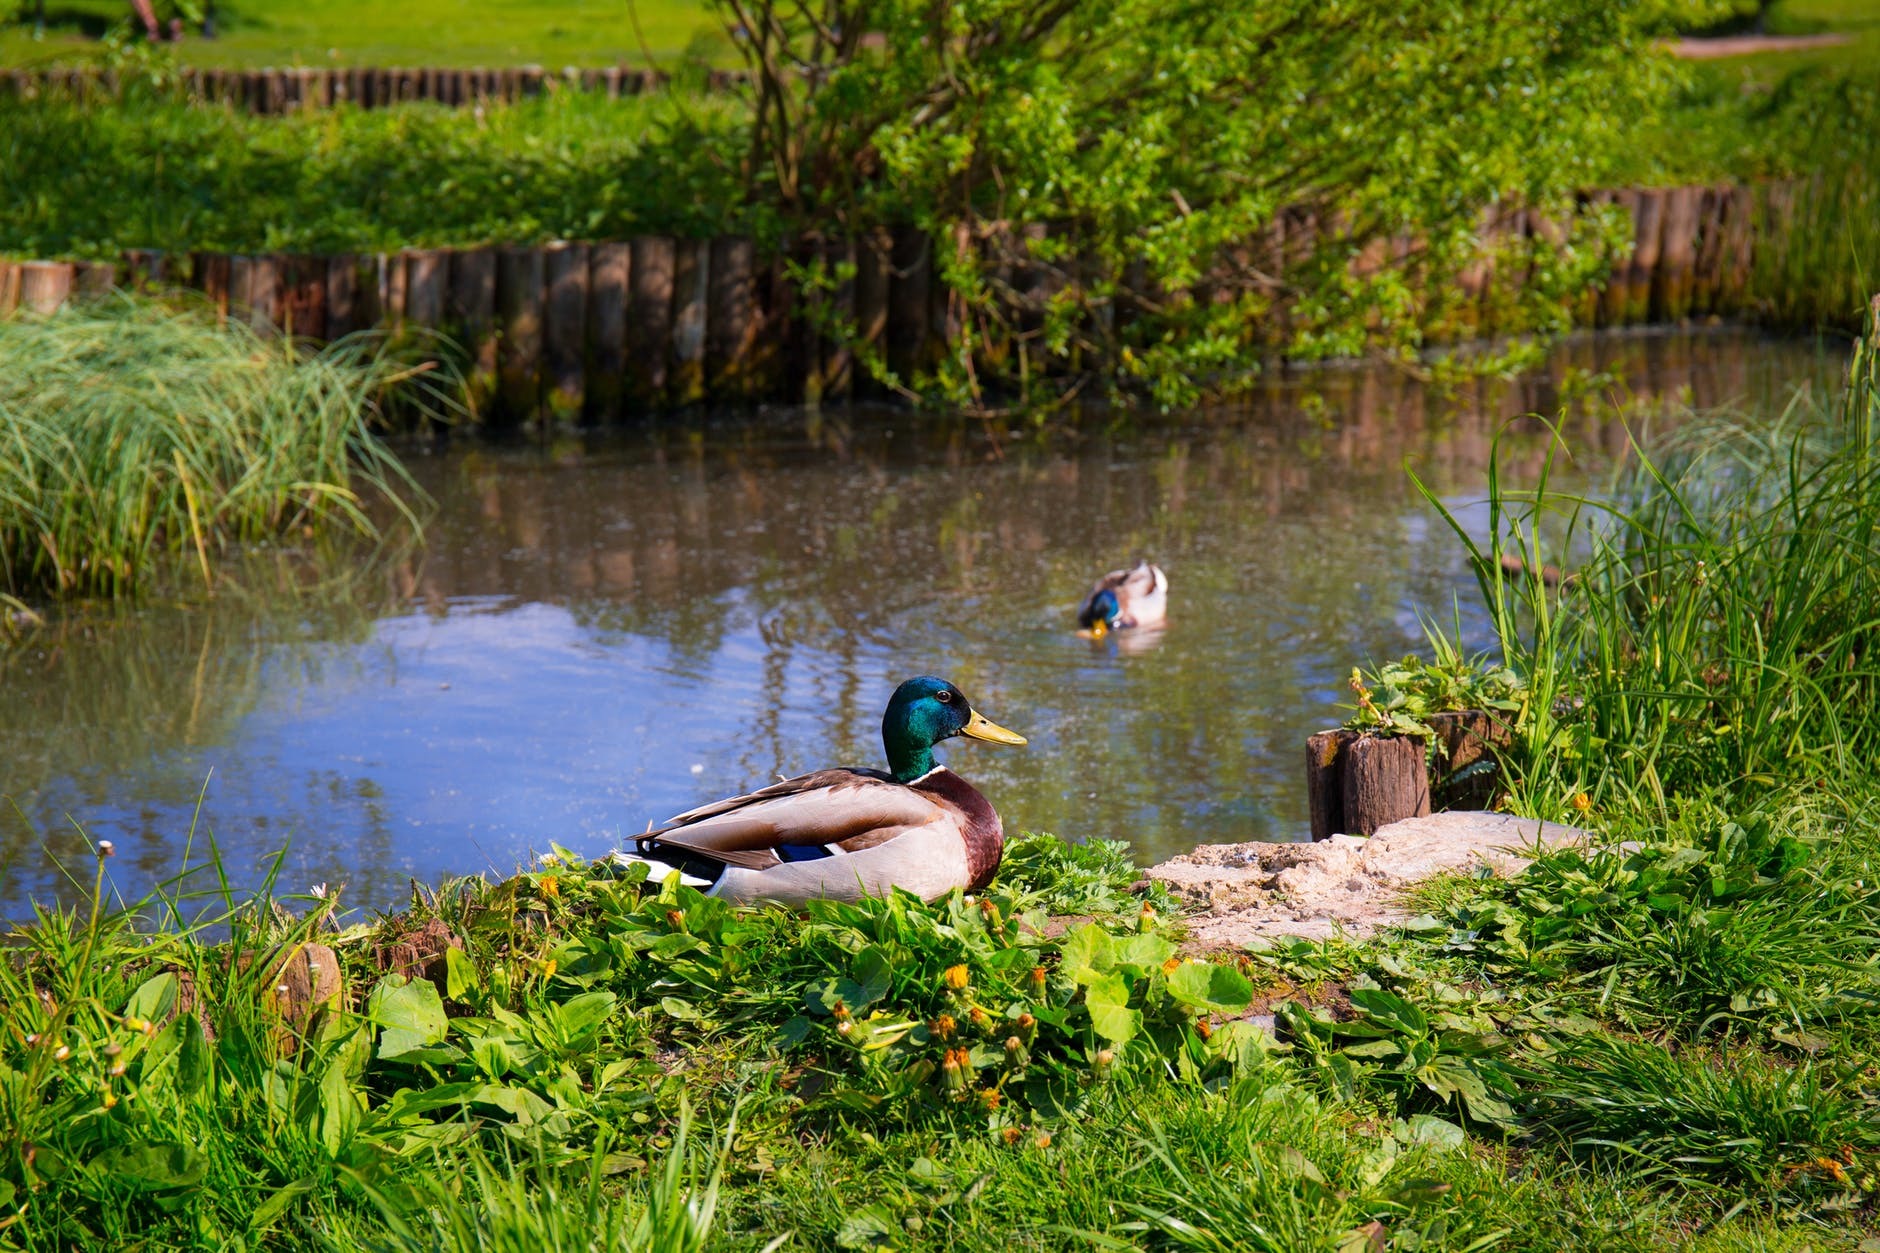 Large pond with ducks.